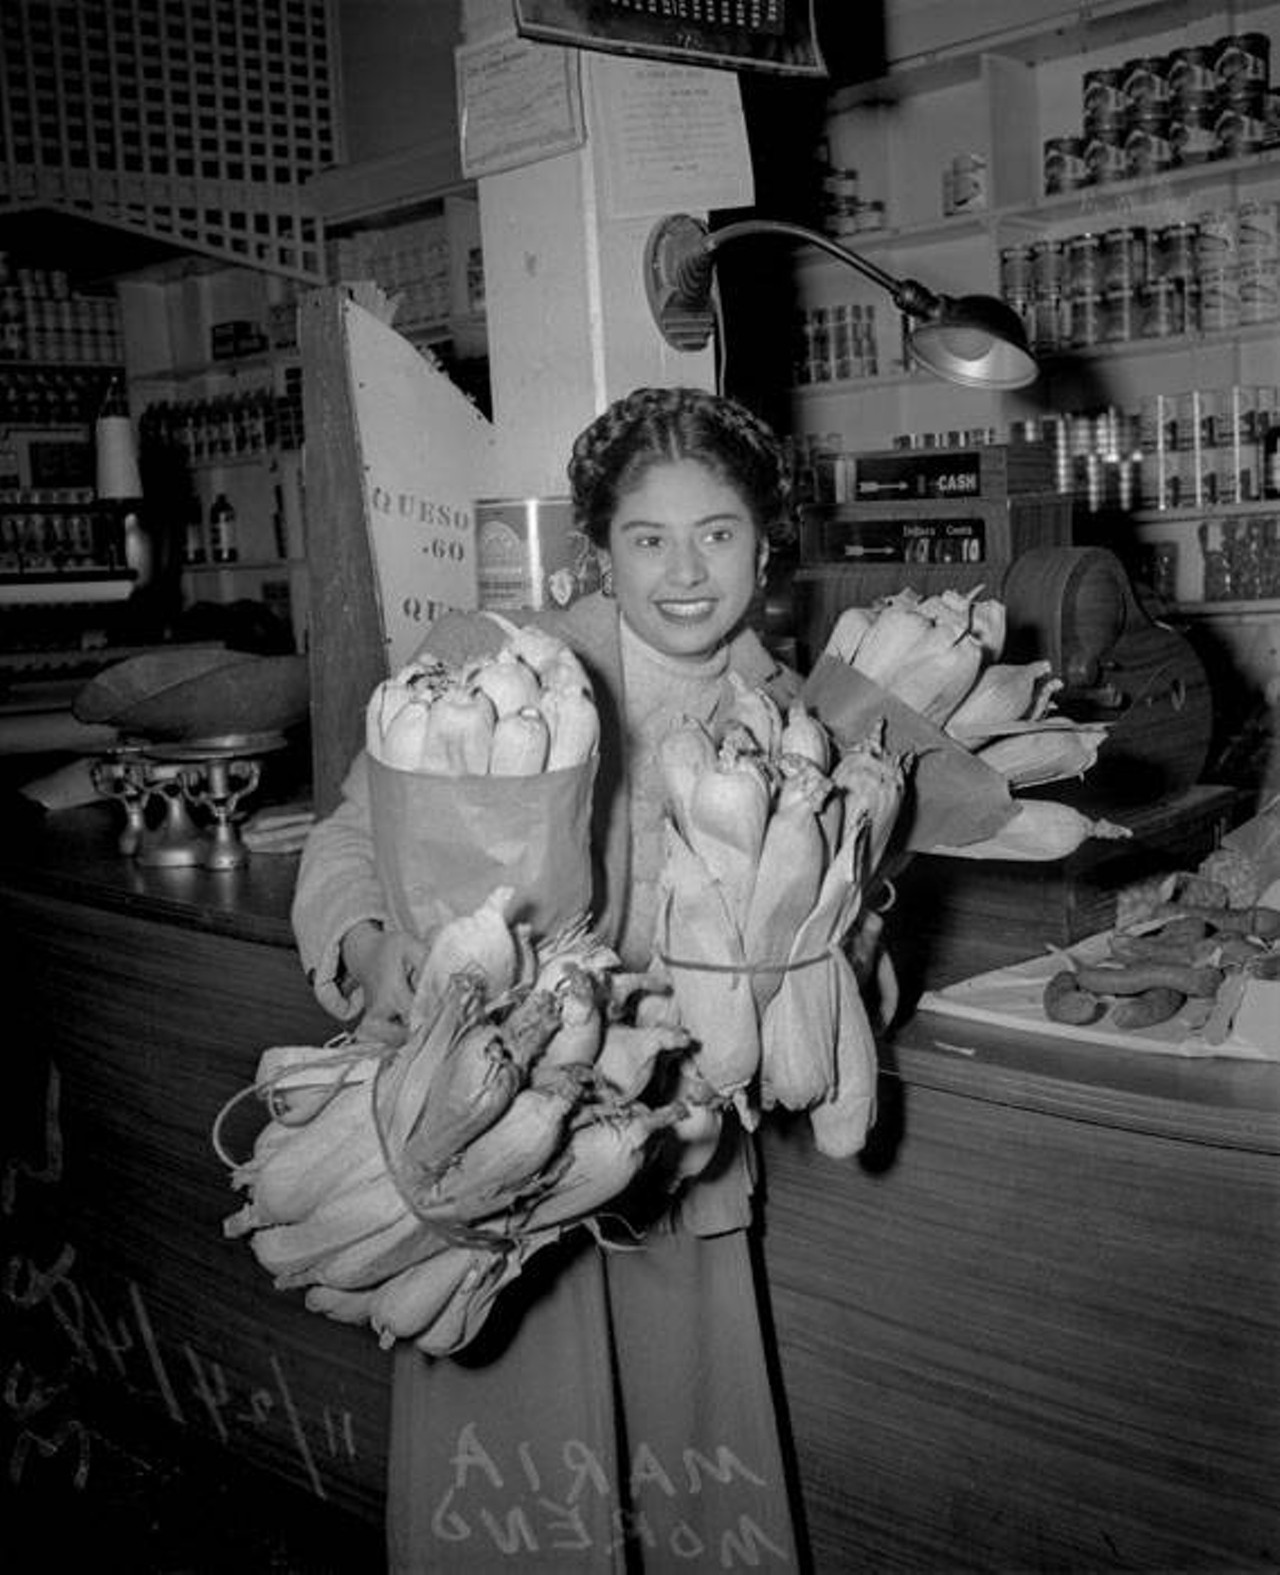 Maria Moreno was photographed carrying armloads of corn shucks by the San Antonio Light in 1948. No doubt preparing for an epic tamalada!